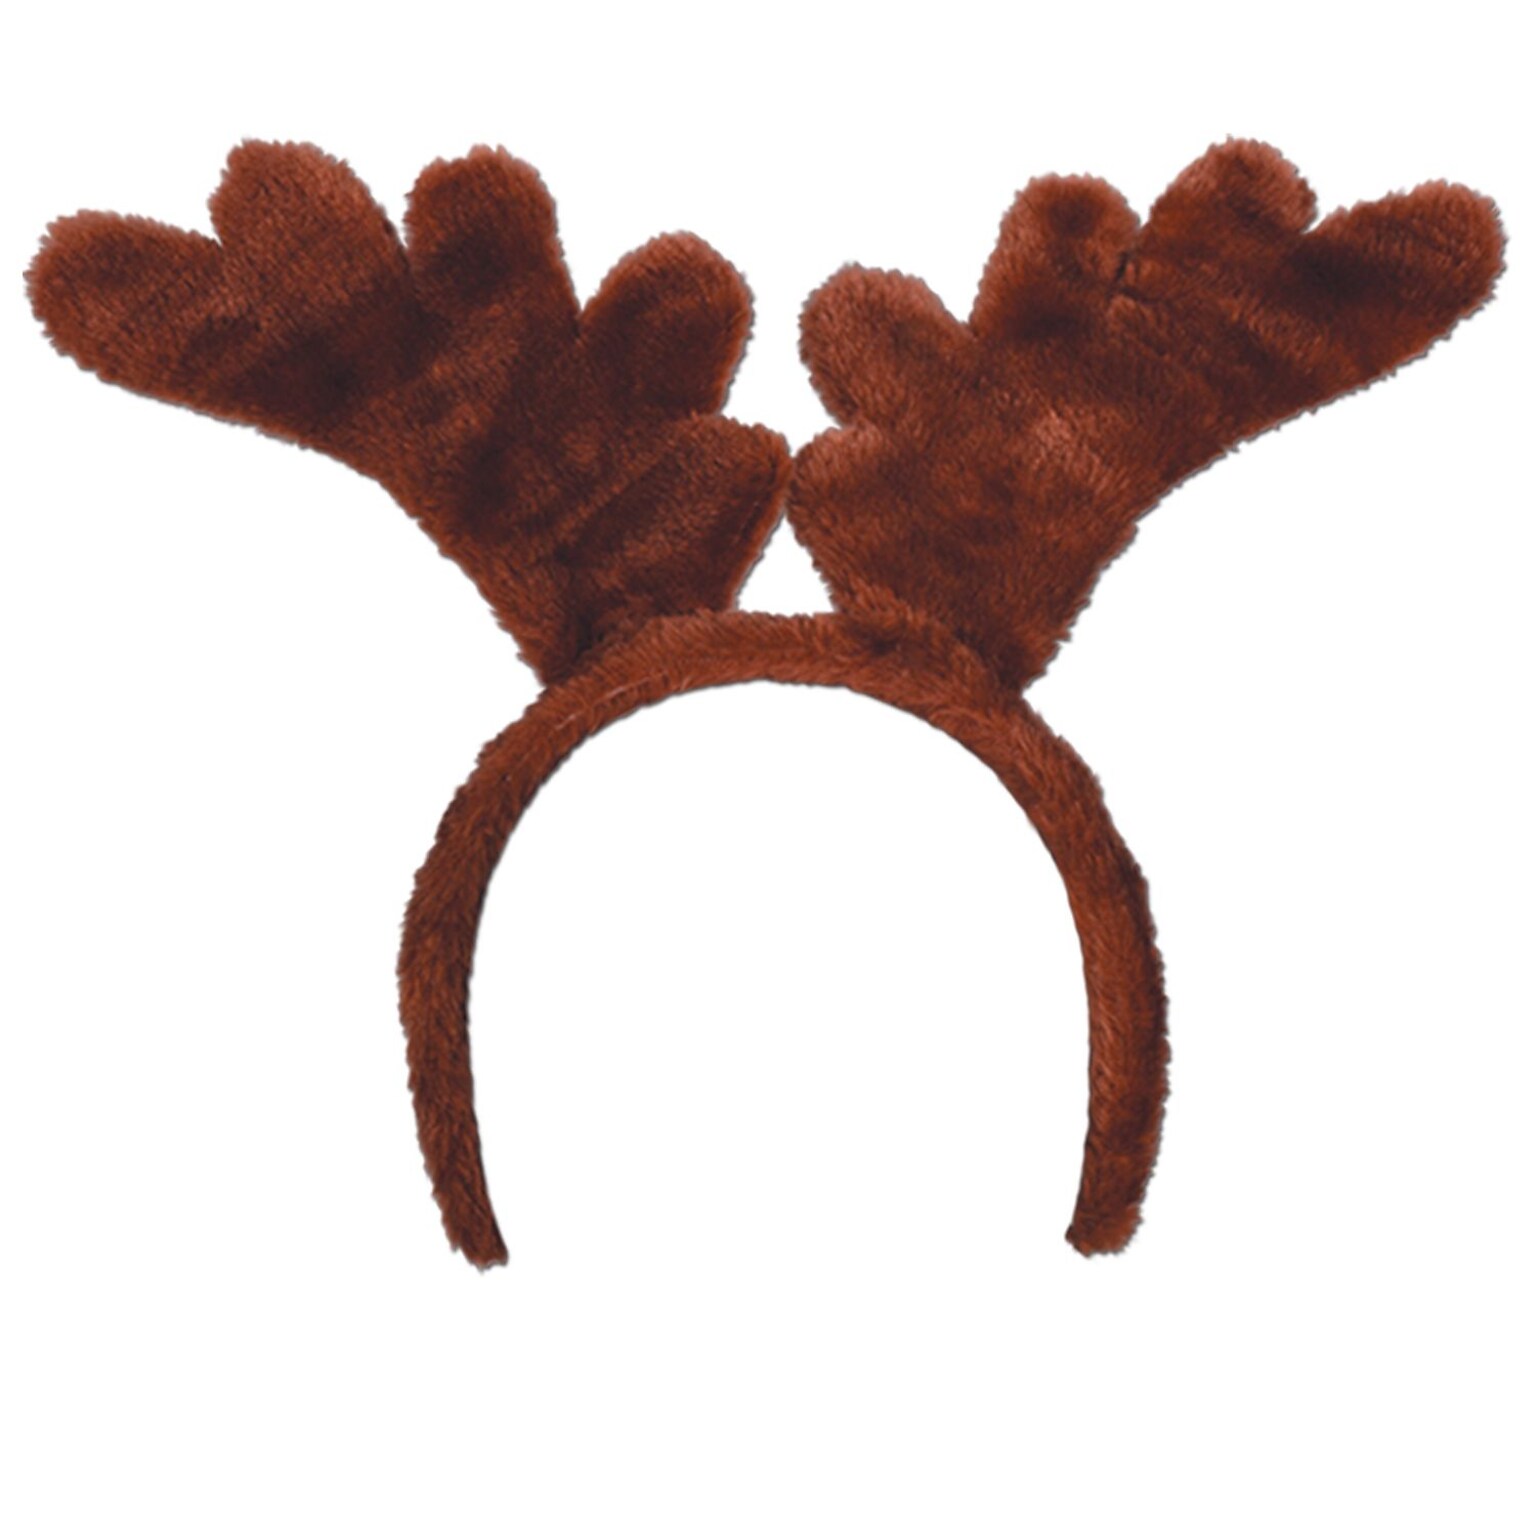 Beistle Soft-Touch Reindeer Antlers